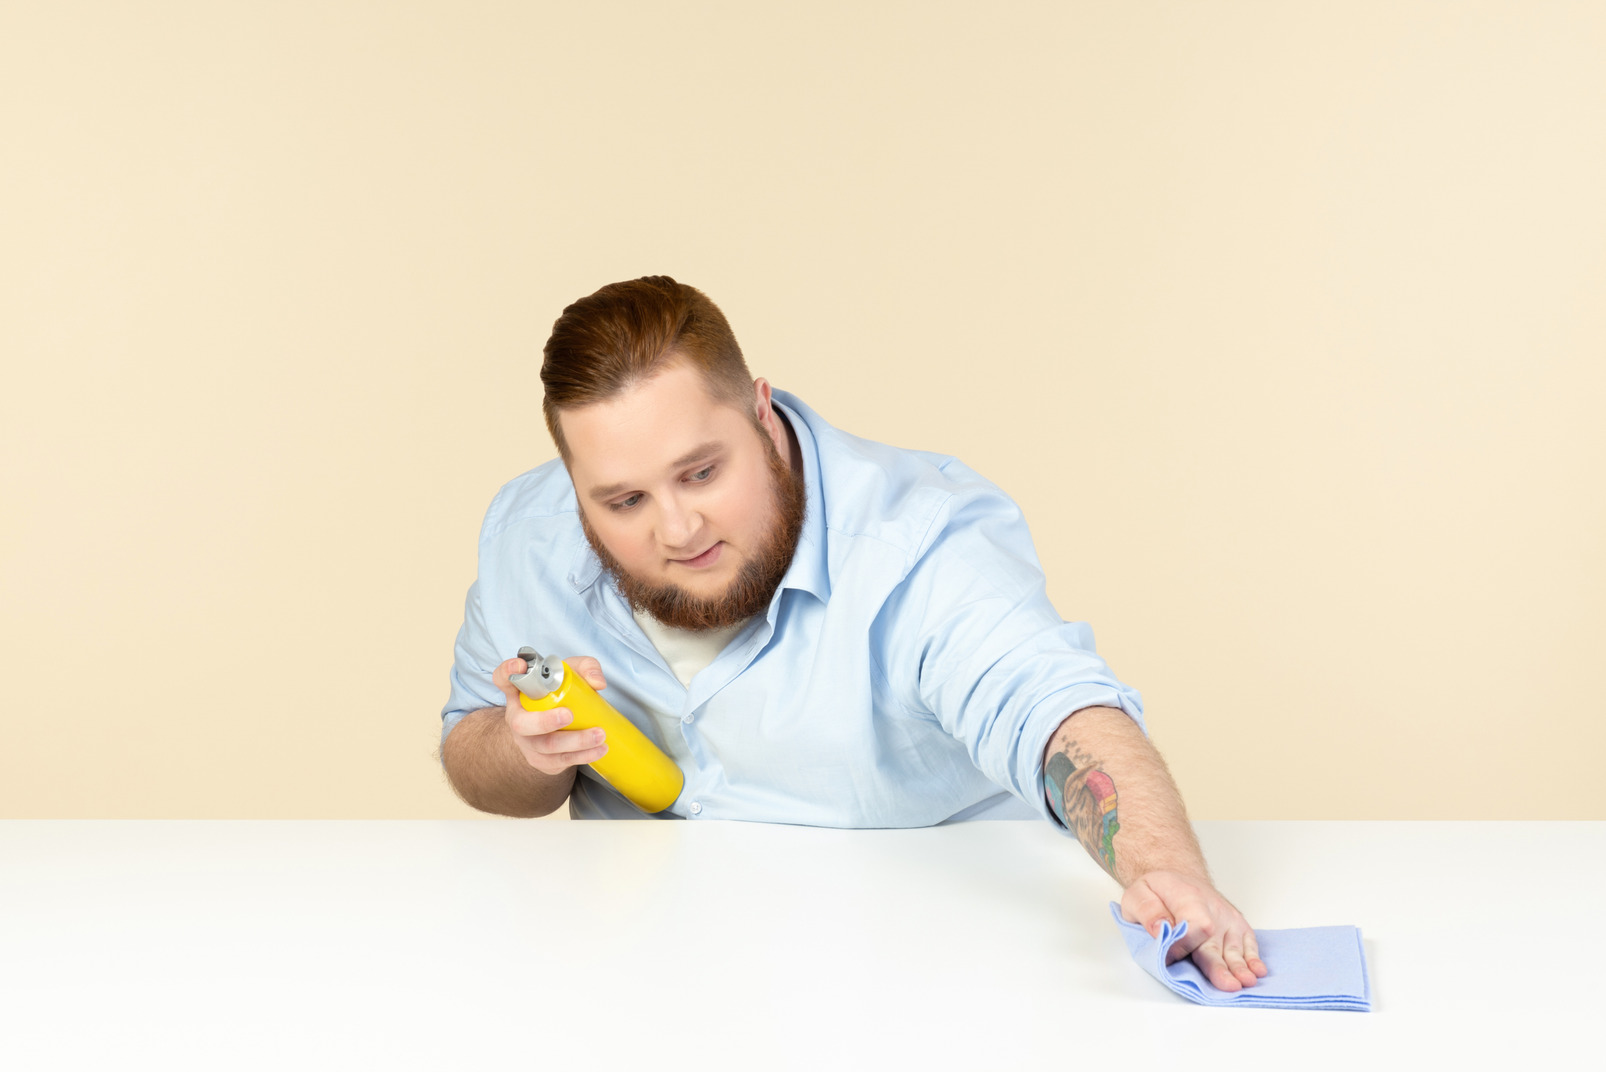 Young overweight man cleaning surface with cleaning spray and a rag